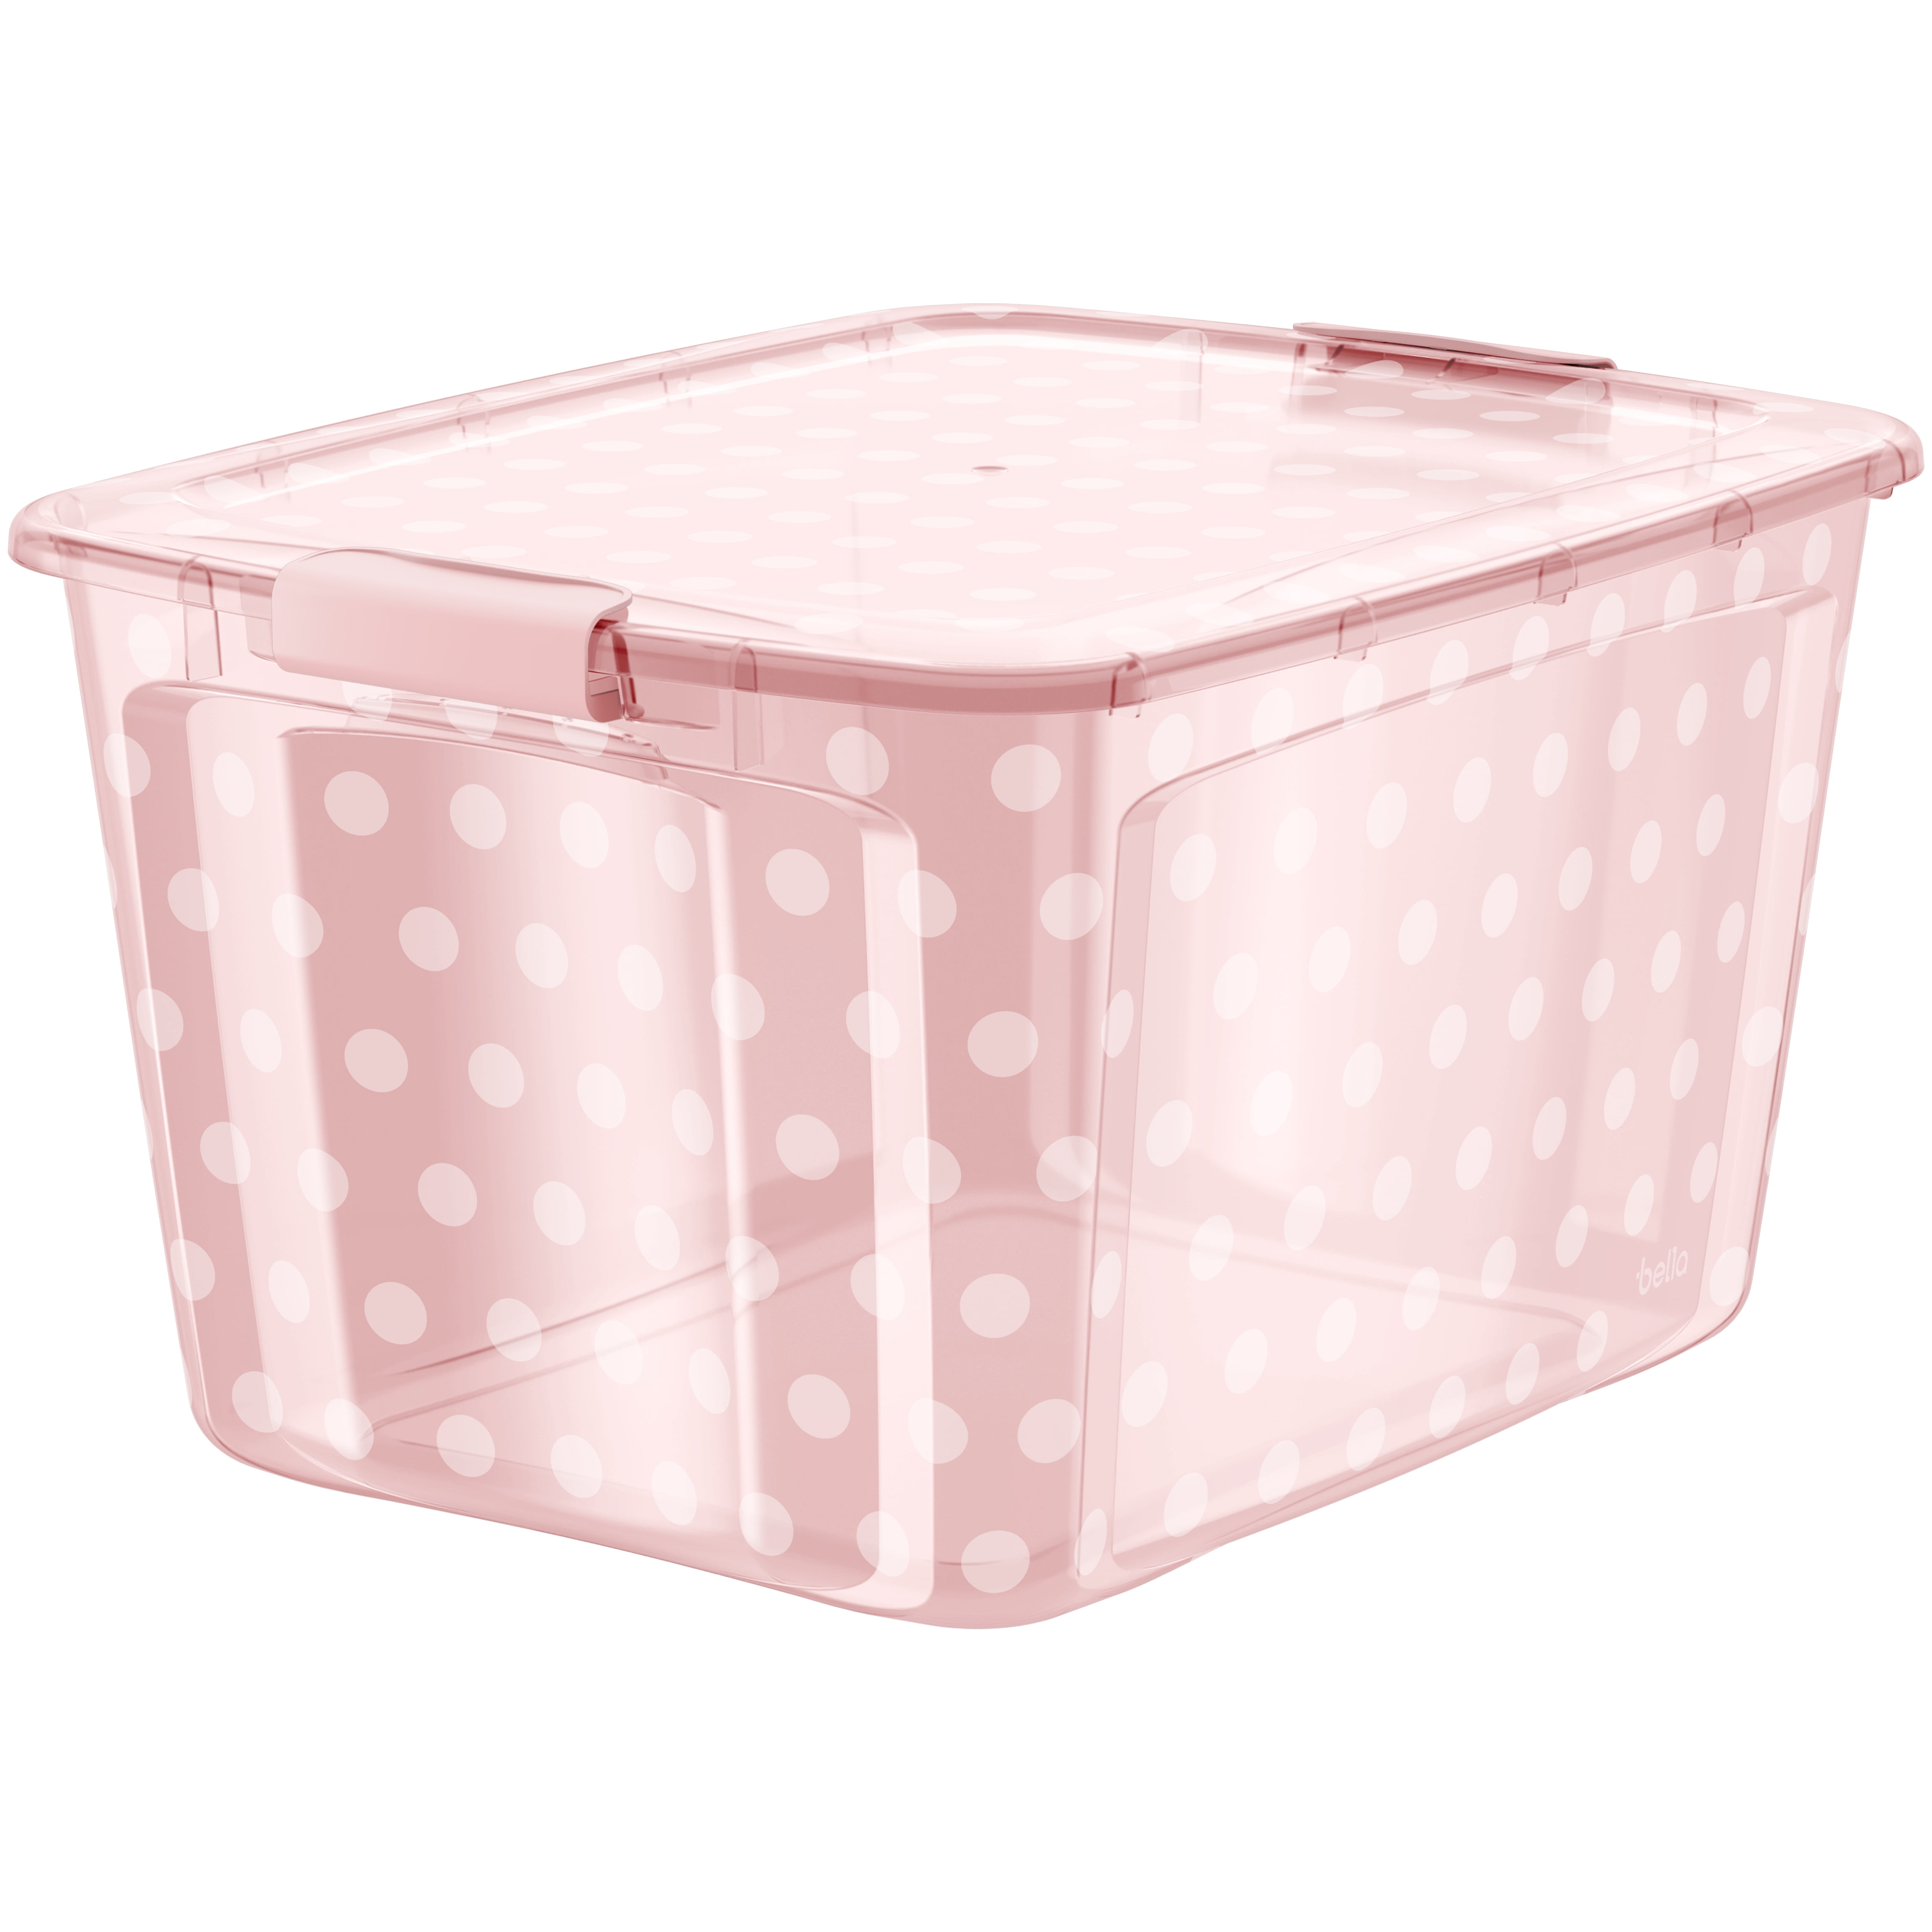 Pink container. – Present&Correct